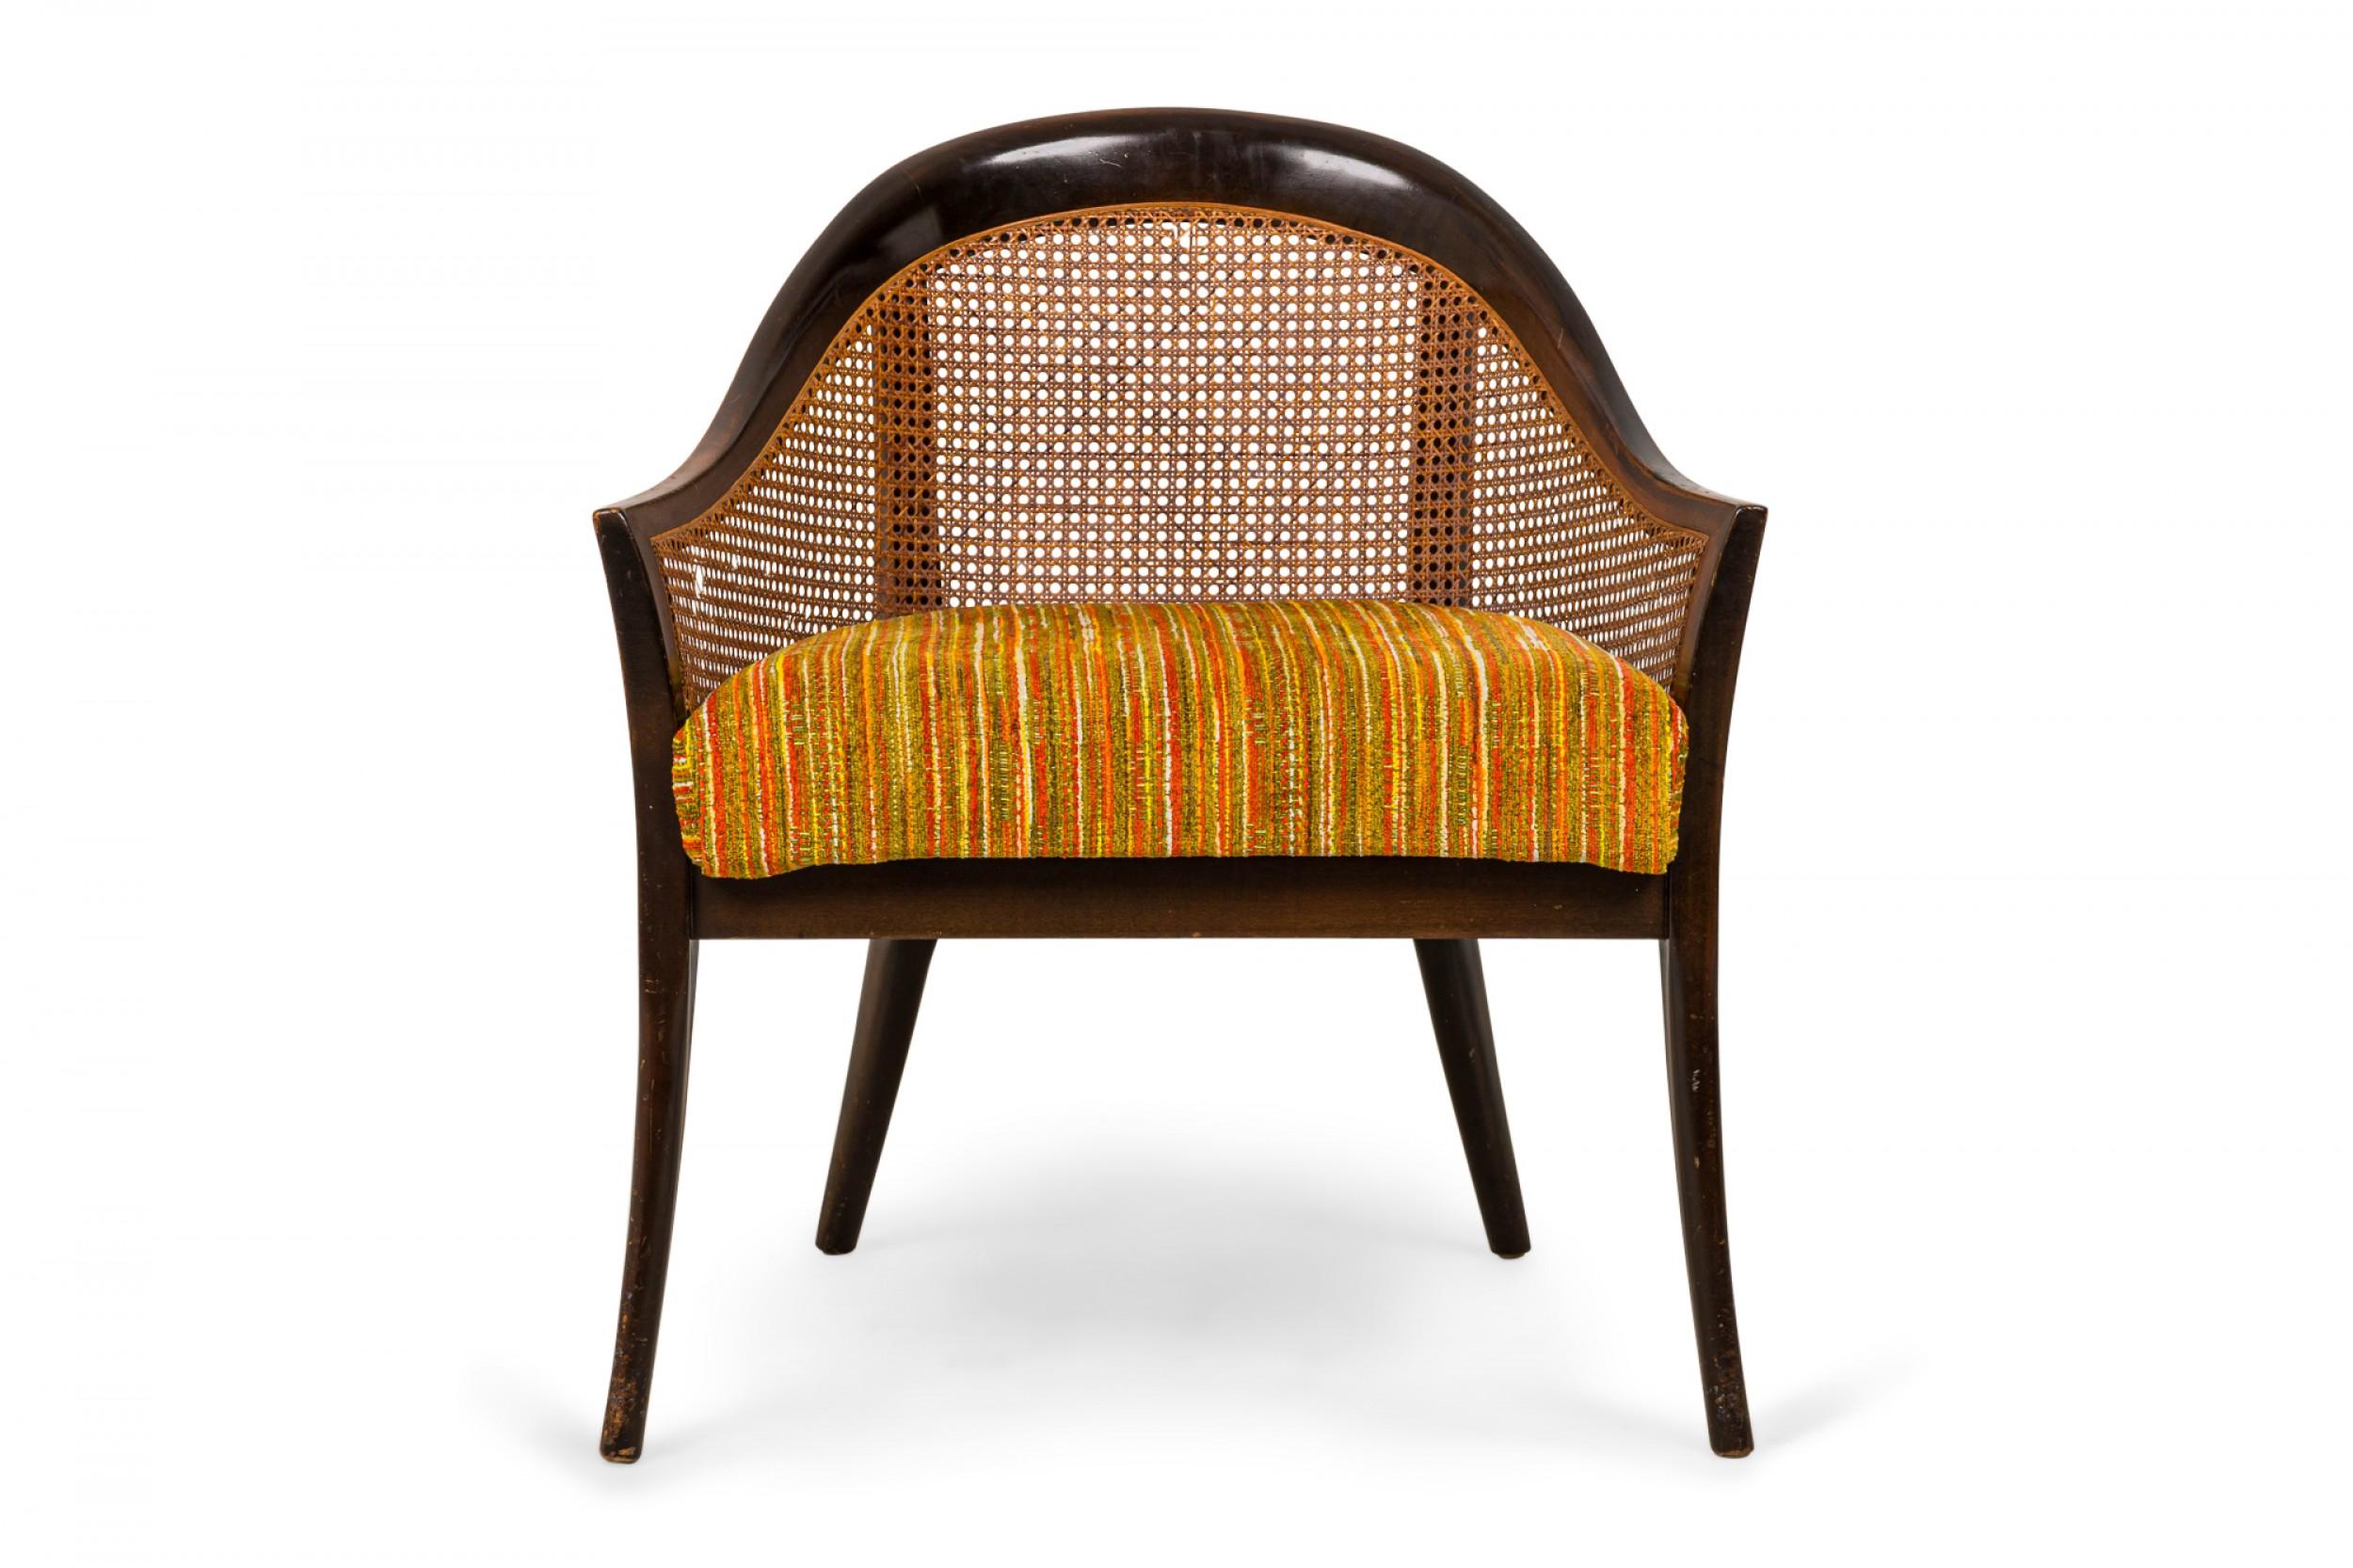 American mid-century armchair with a curved dark wood frame, caned sides and back, and a multi-colored striped seat cushion, resting on four tapered wooden legs. (HARVEY PROBBER)(Similar chair: DUF0551)